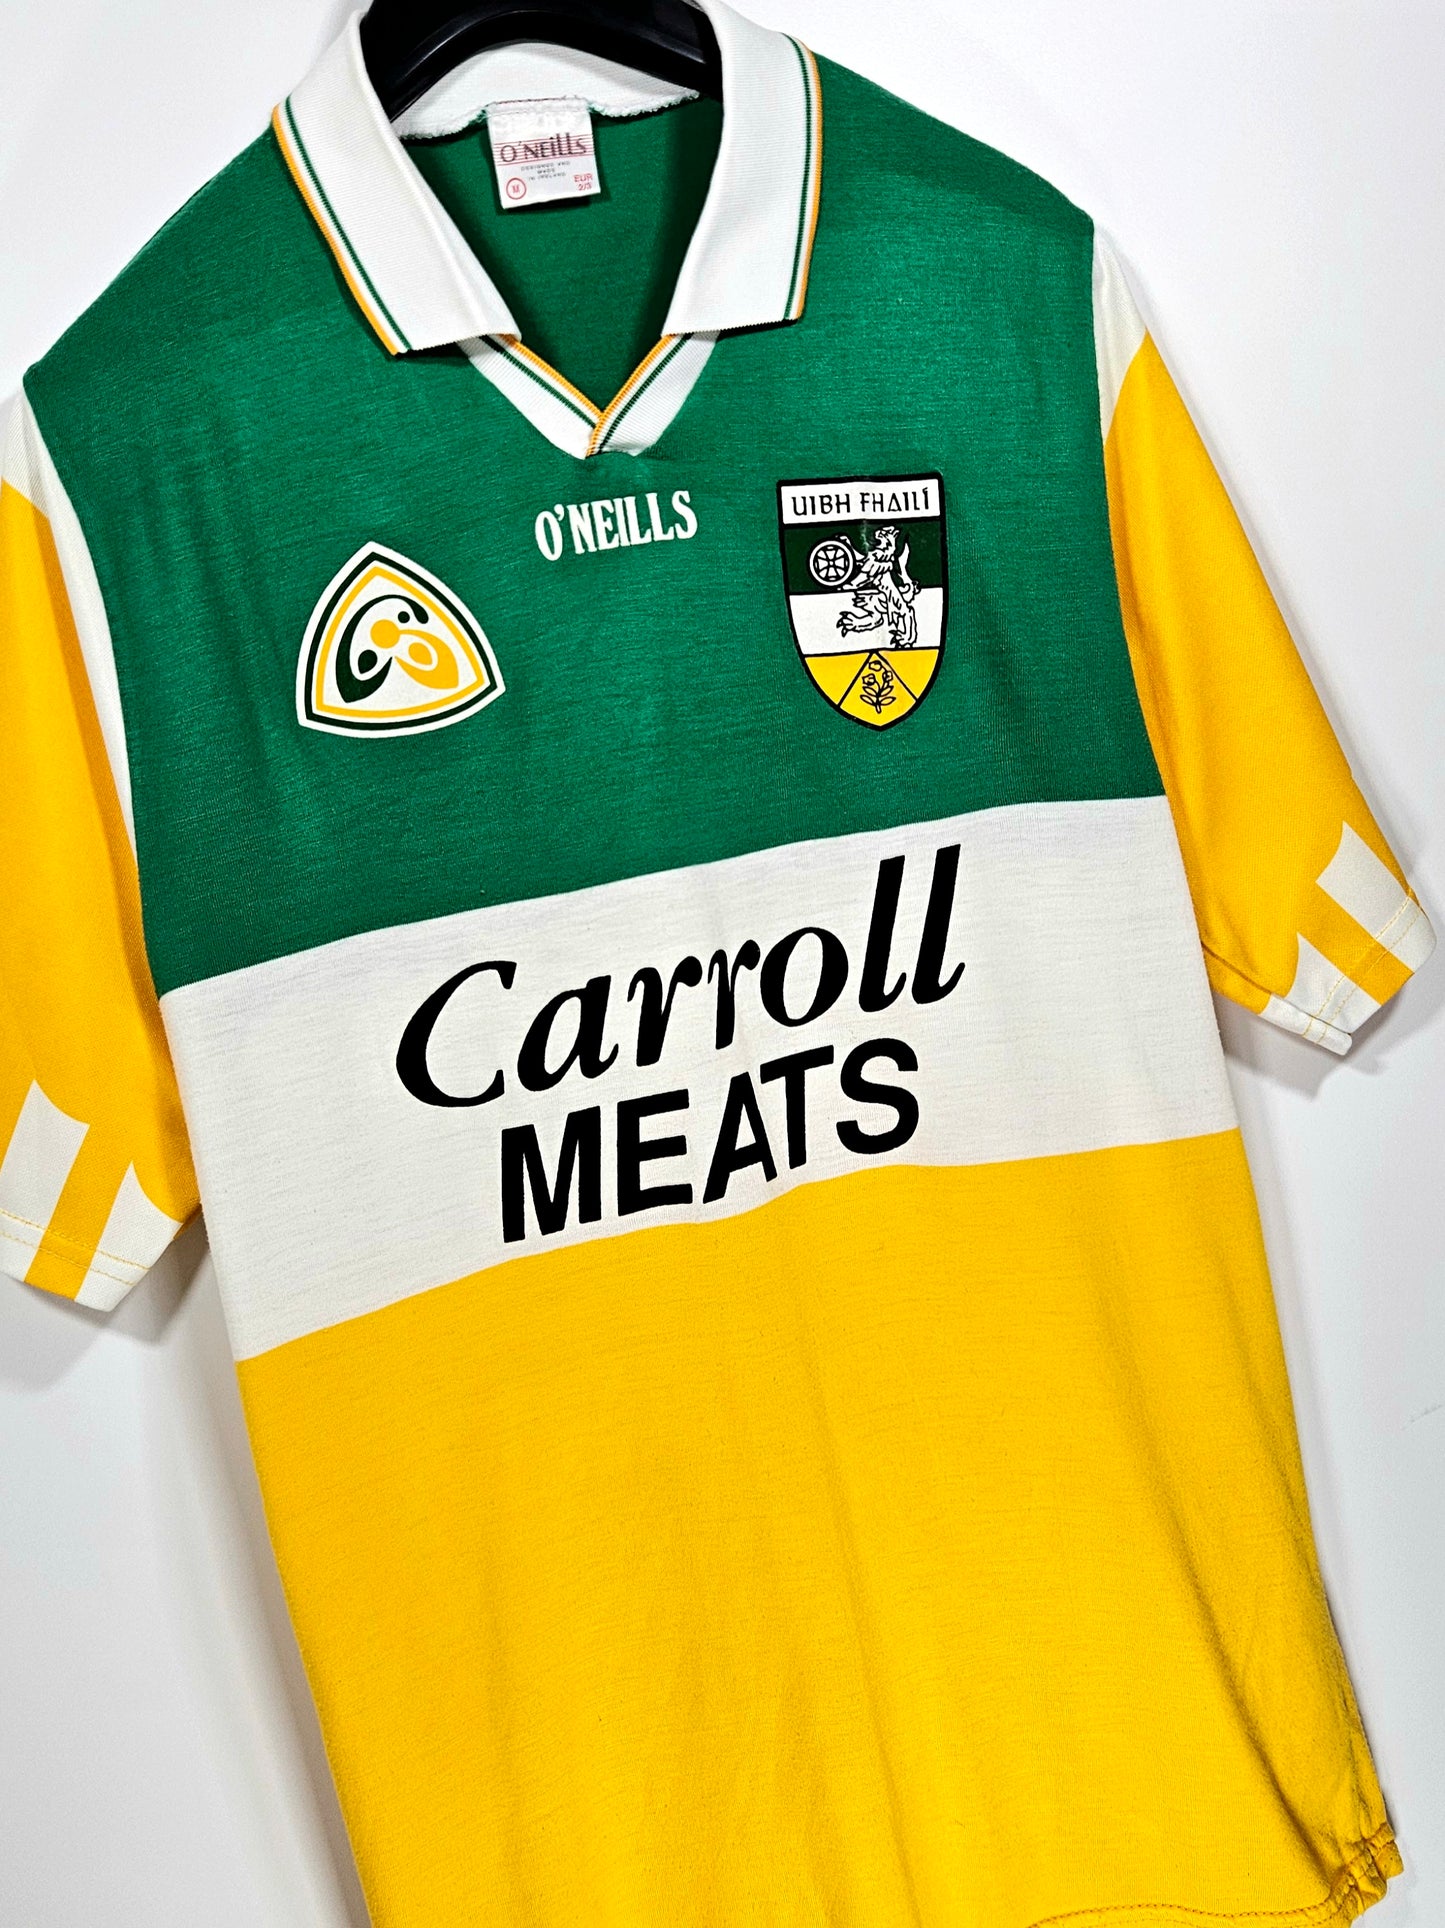 Offaly 1996 (M)